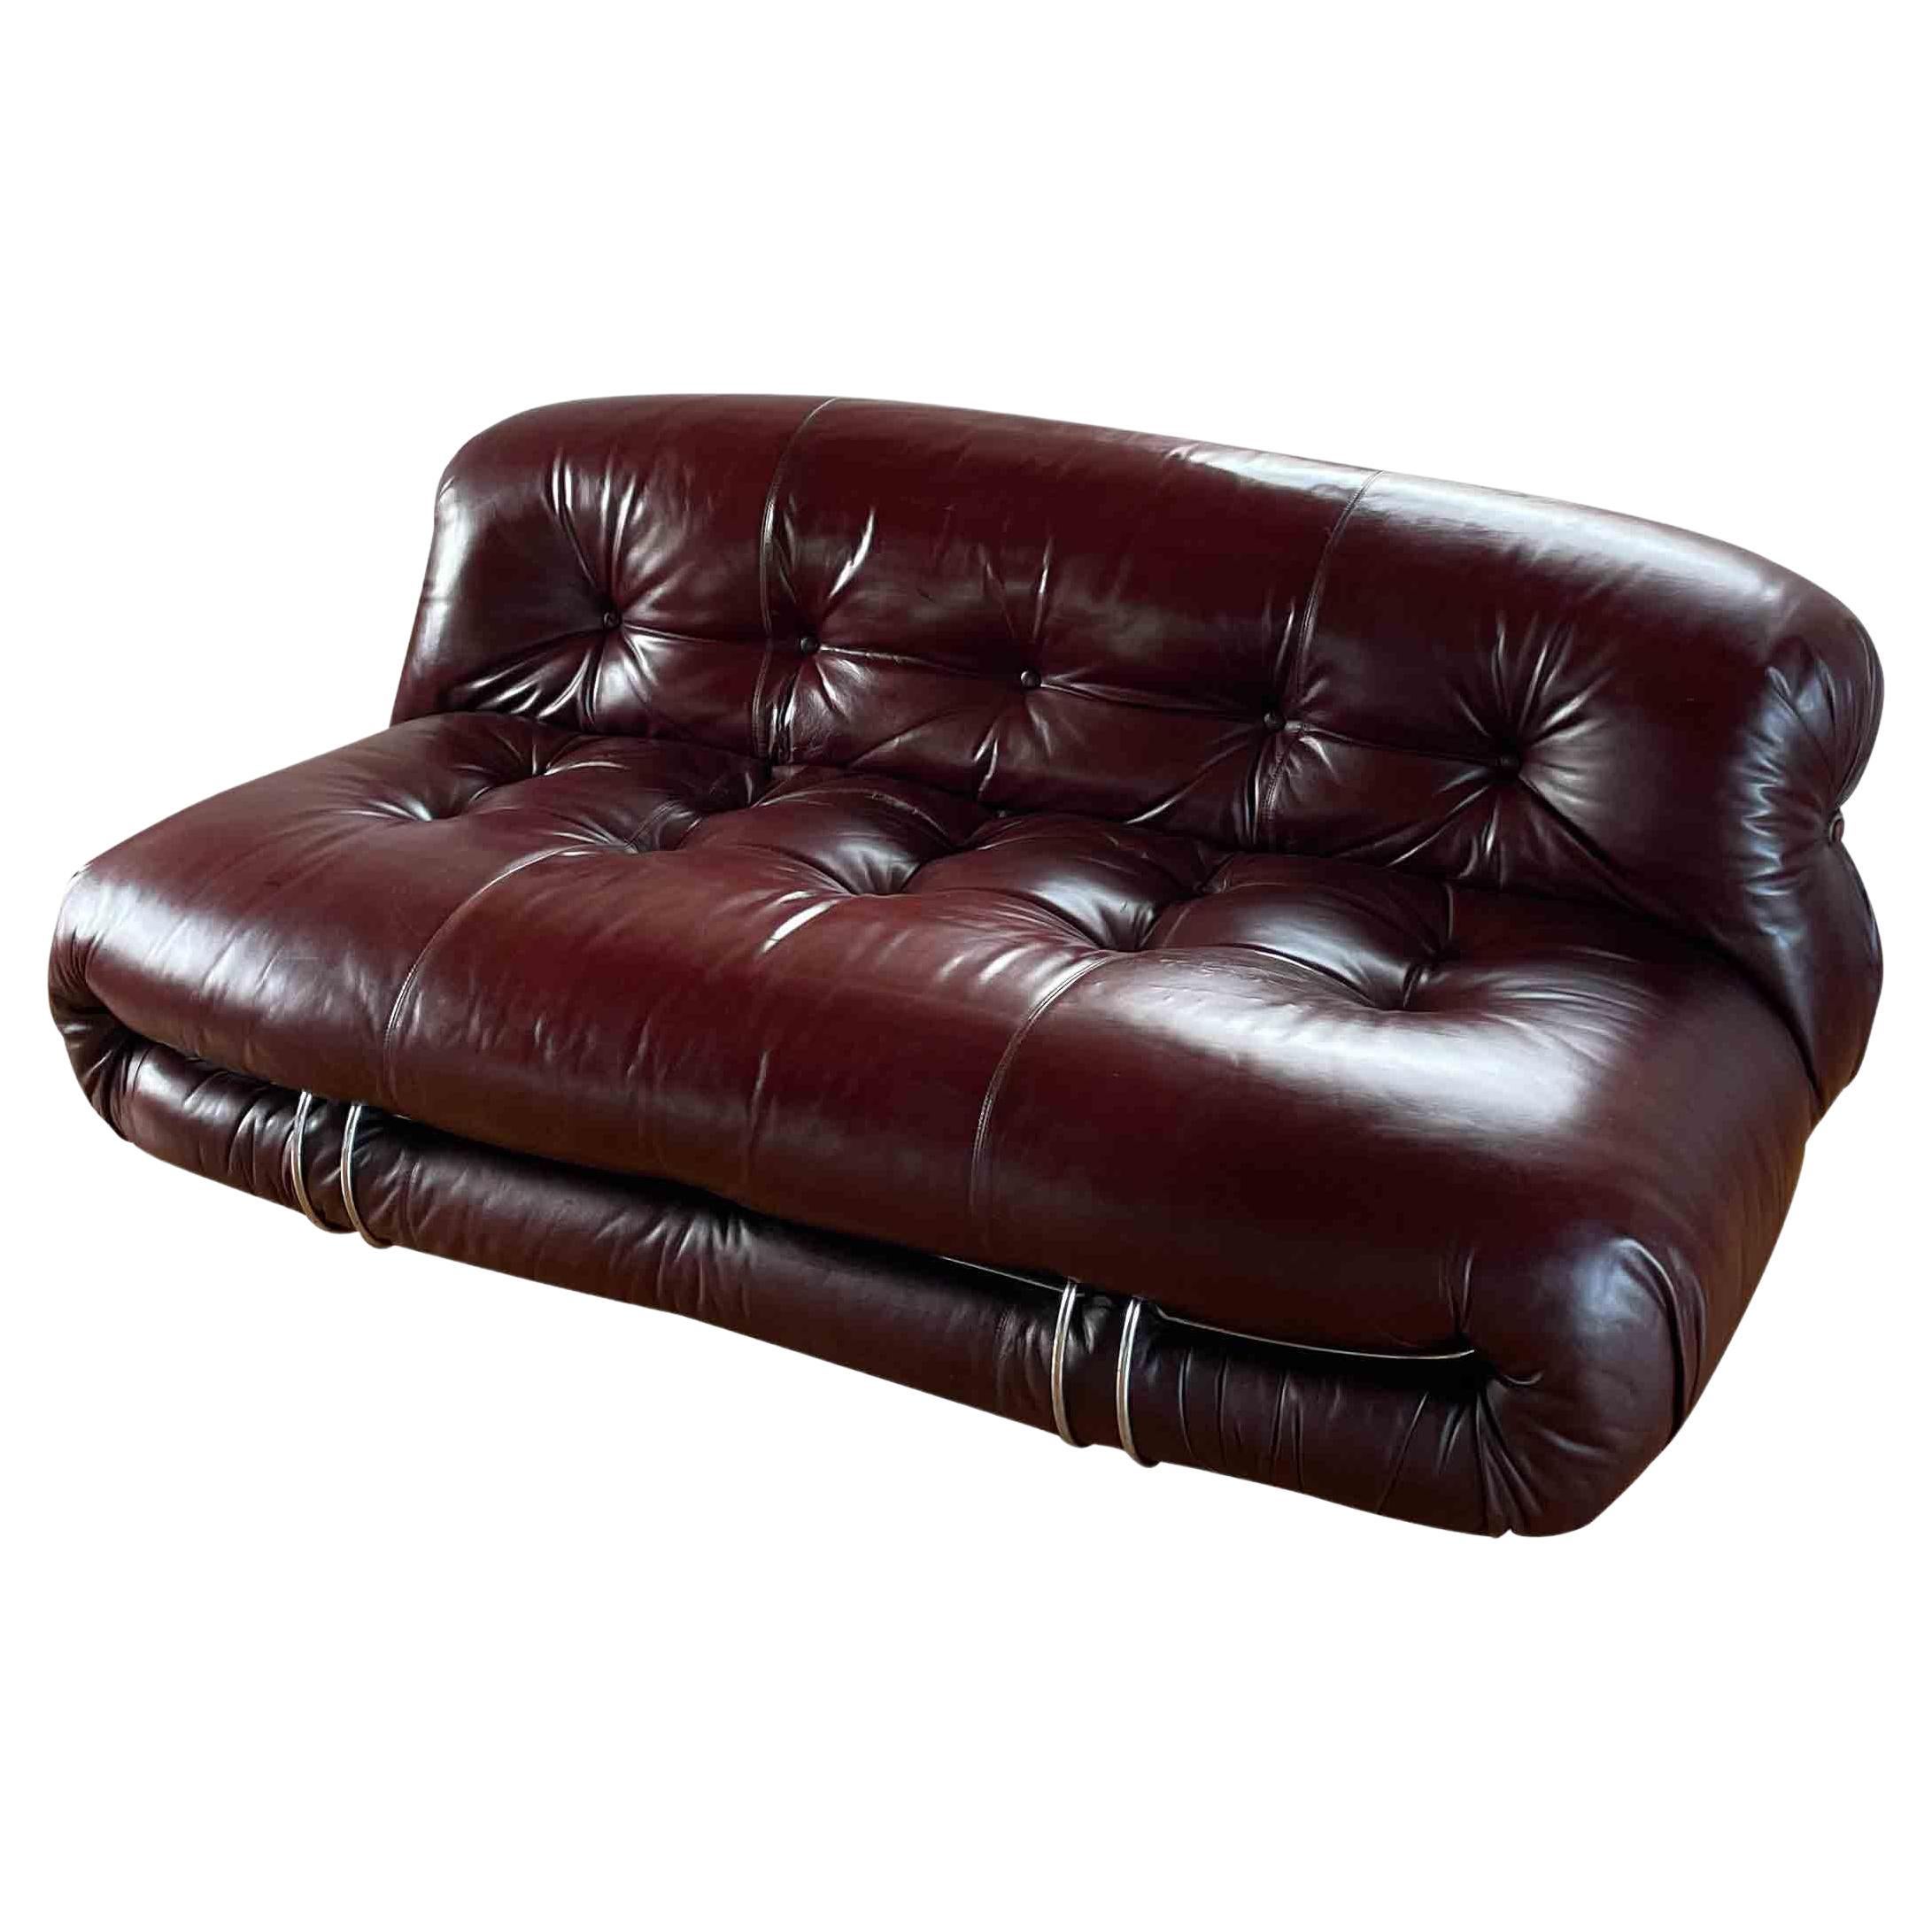 Afra and Tobia Scarpa Brown Leather Two-Seater Soriana Sofa for Cassina, 1969 For Sale